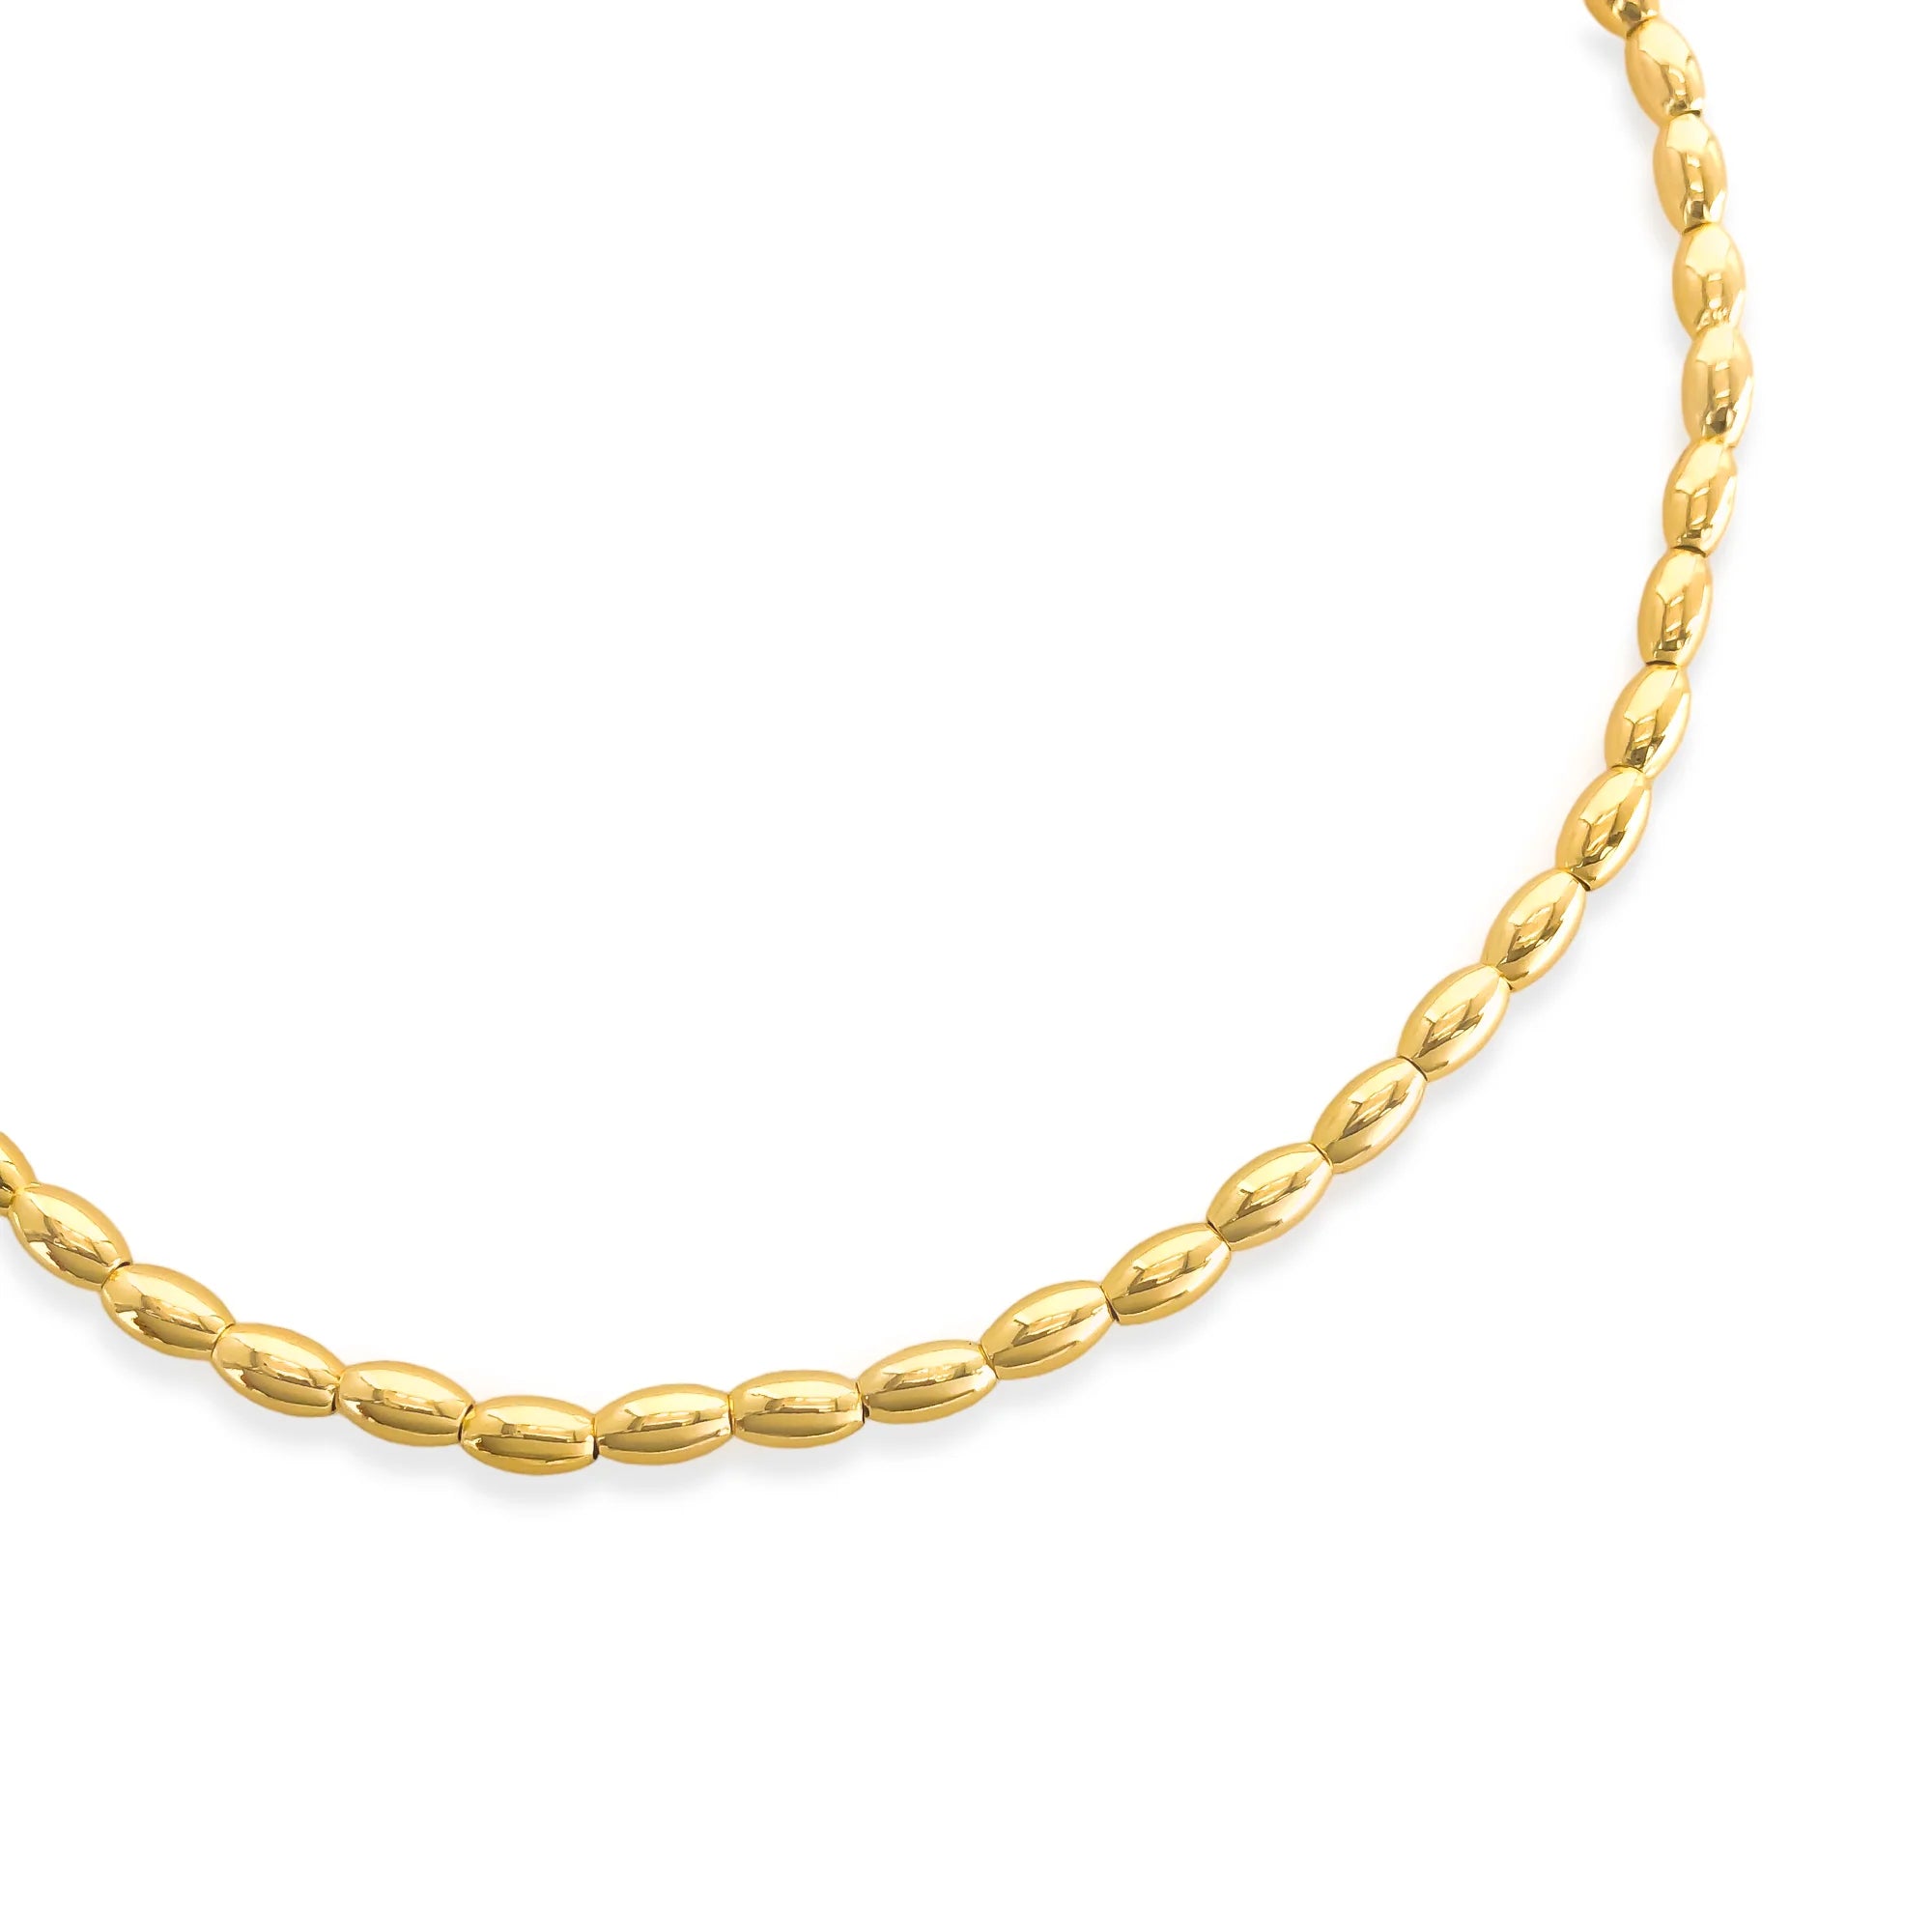 Rice Bead Gold Necklace